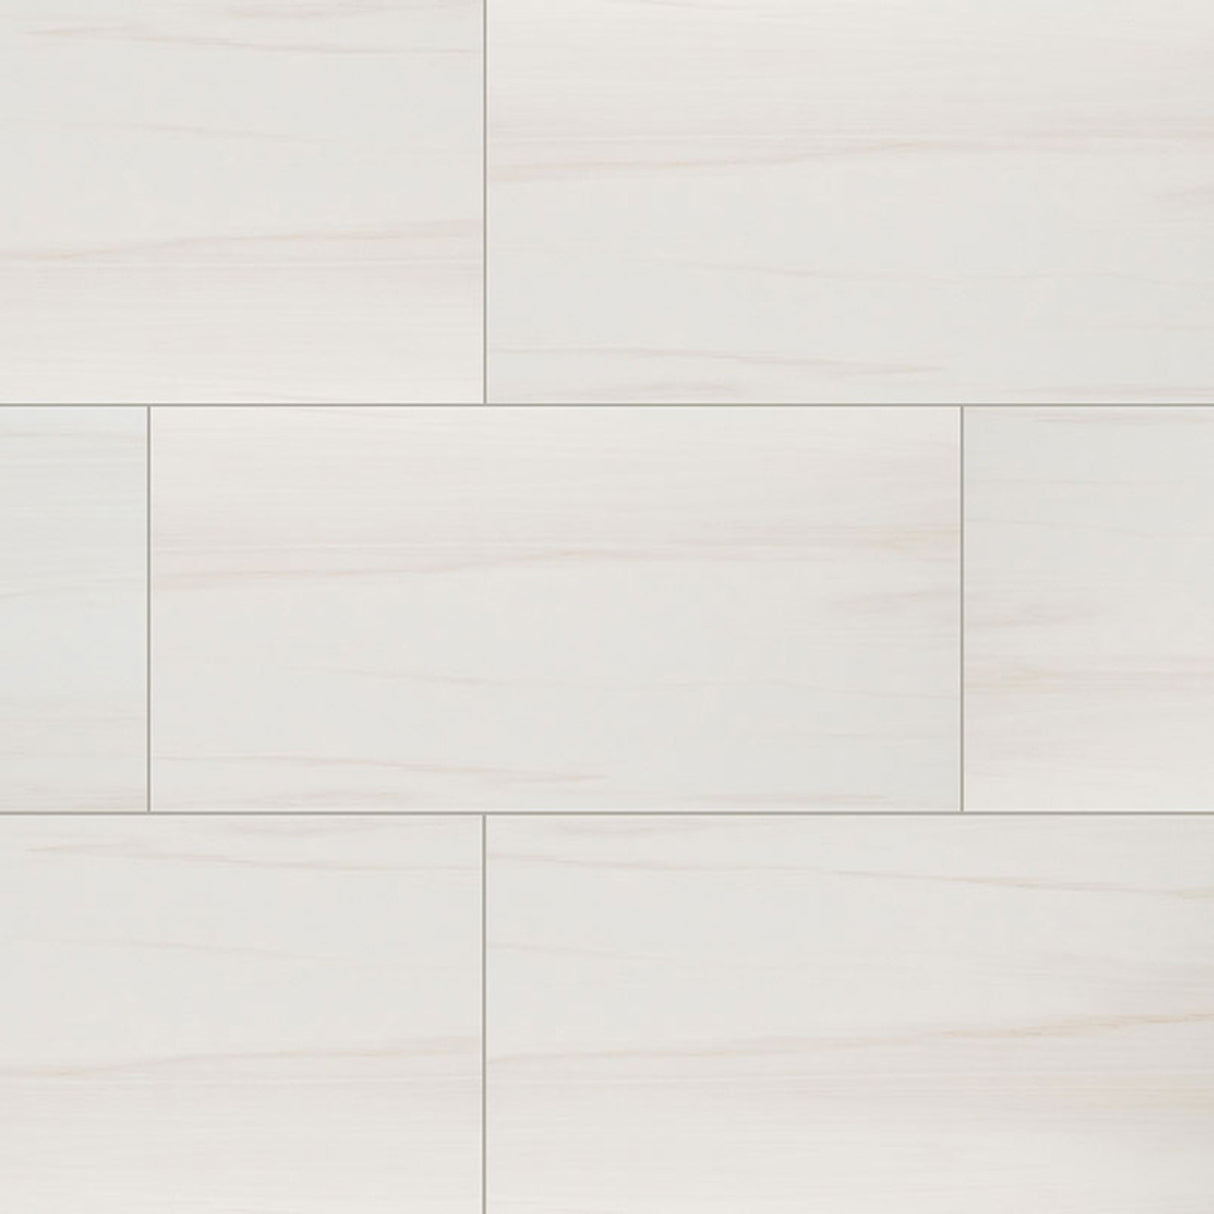 eden dolomite 12x24 polished porcelain floor and wall tile NEDEDOL1224P product shot multiple tiles angle view #Size_12"x24"